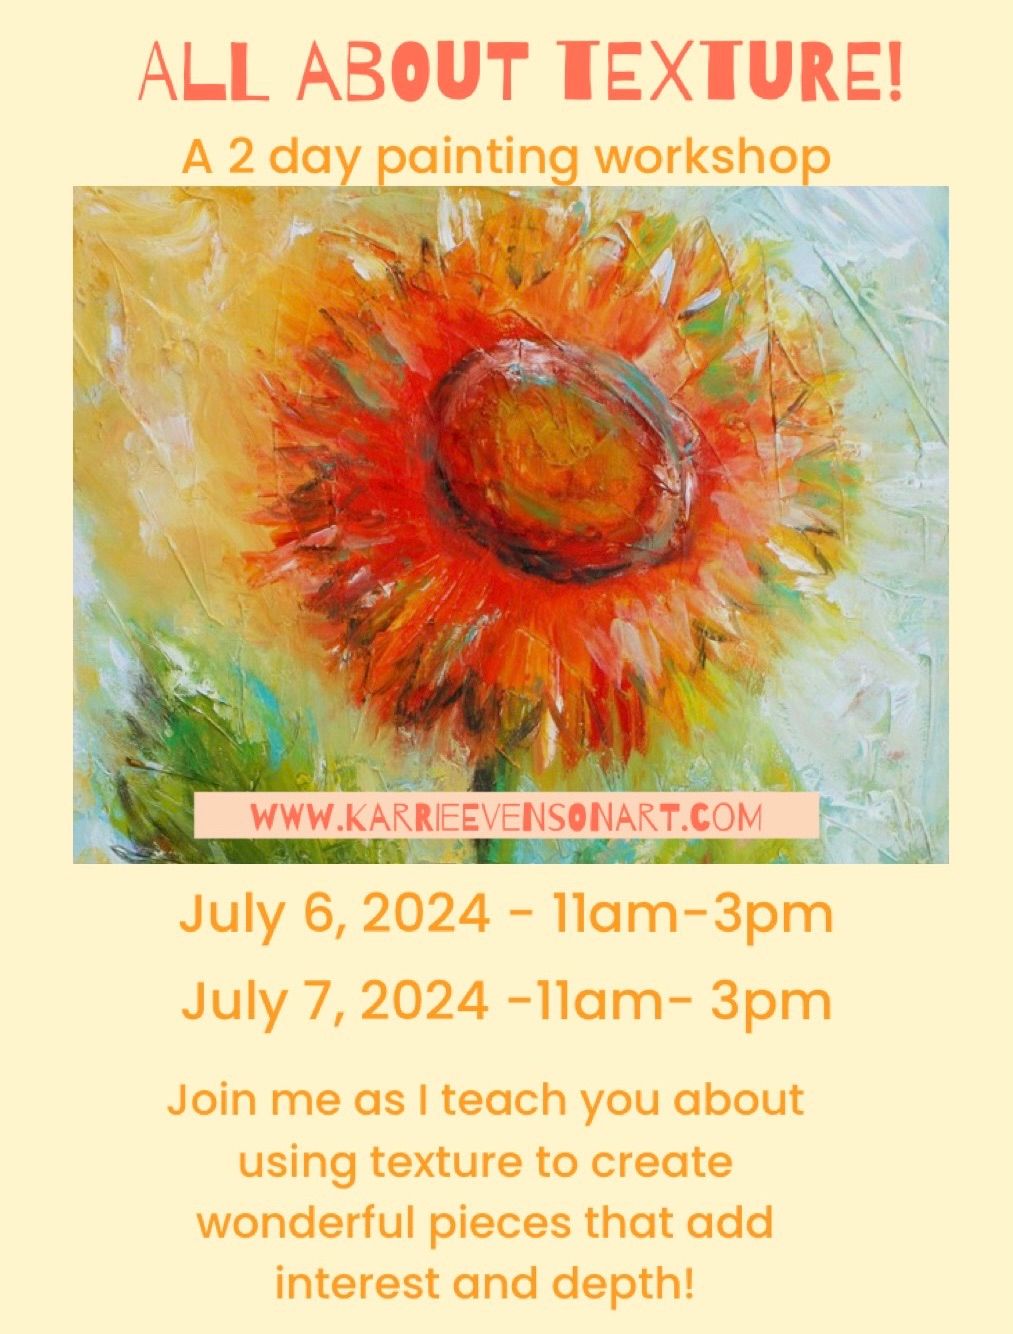 All about Texture painting workshop with Karrie Evenson!